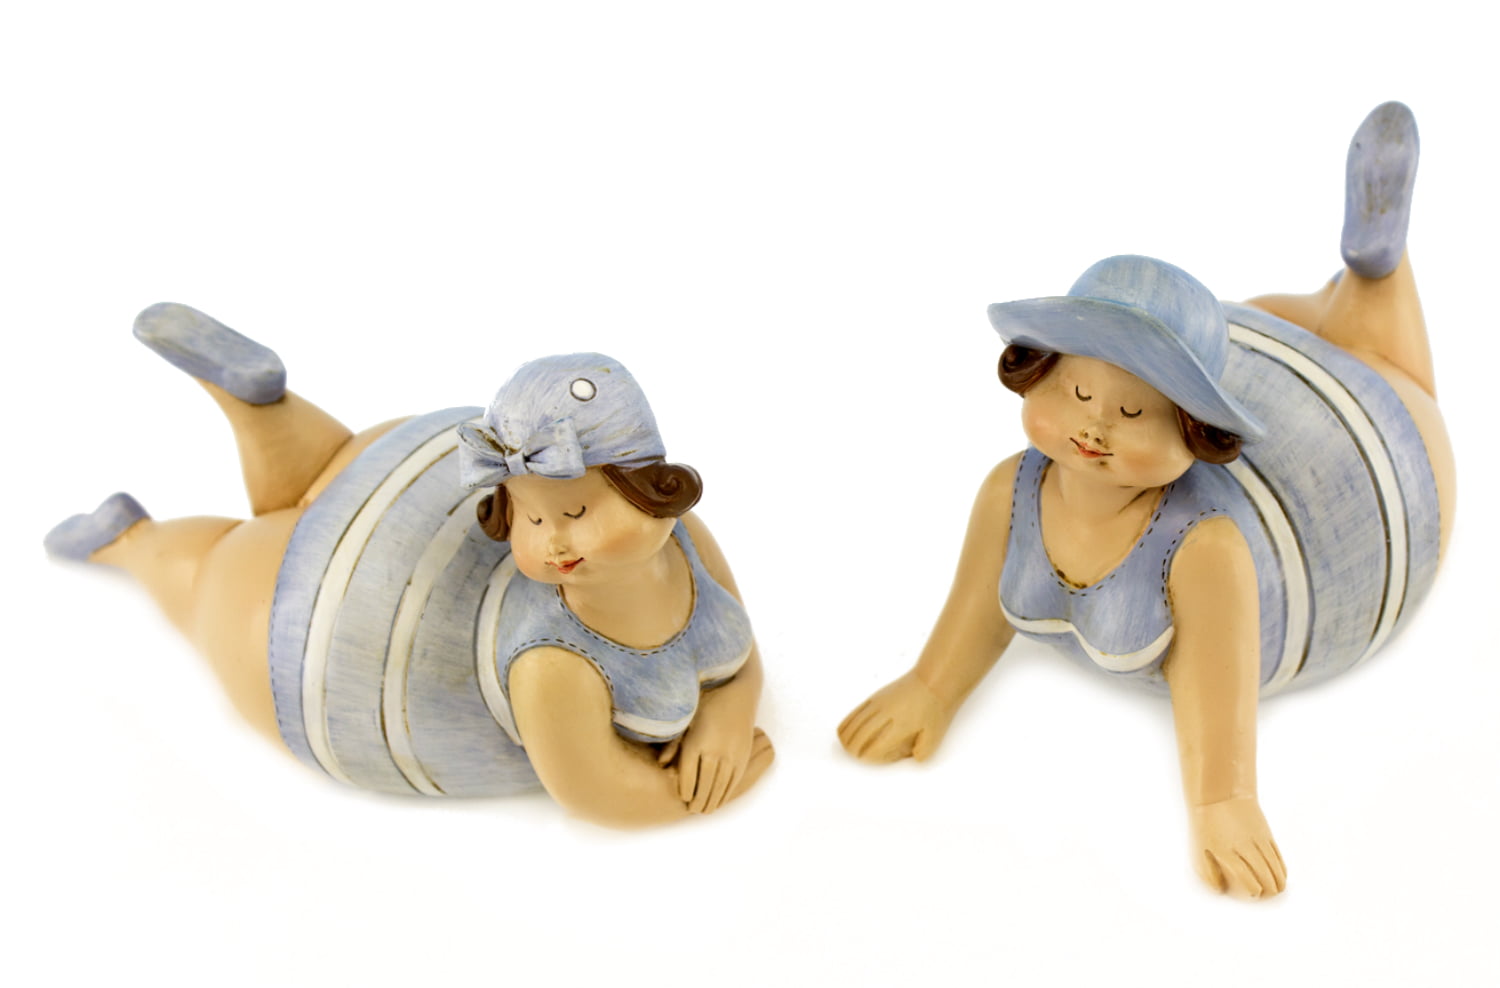 Lounging on Beach Bathing Beauties Shelf or Table Figurines Set of 2 for sale online 